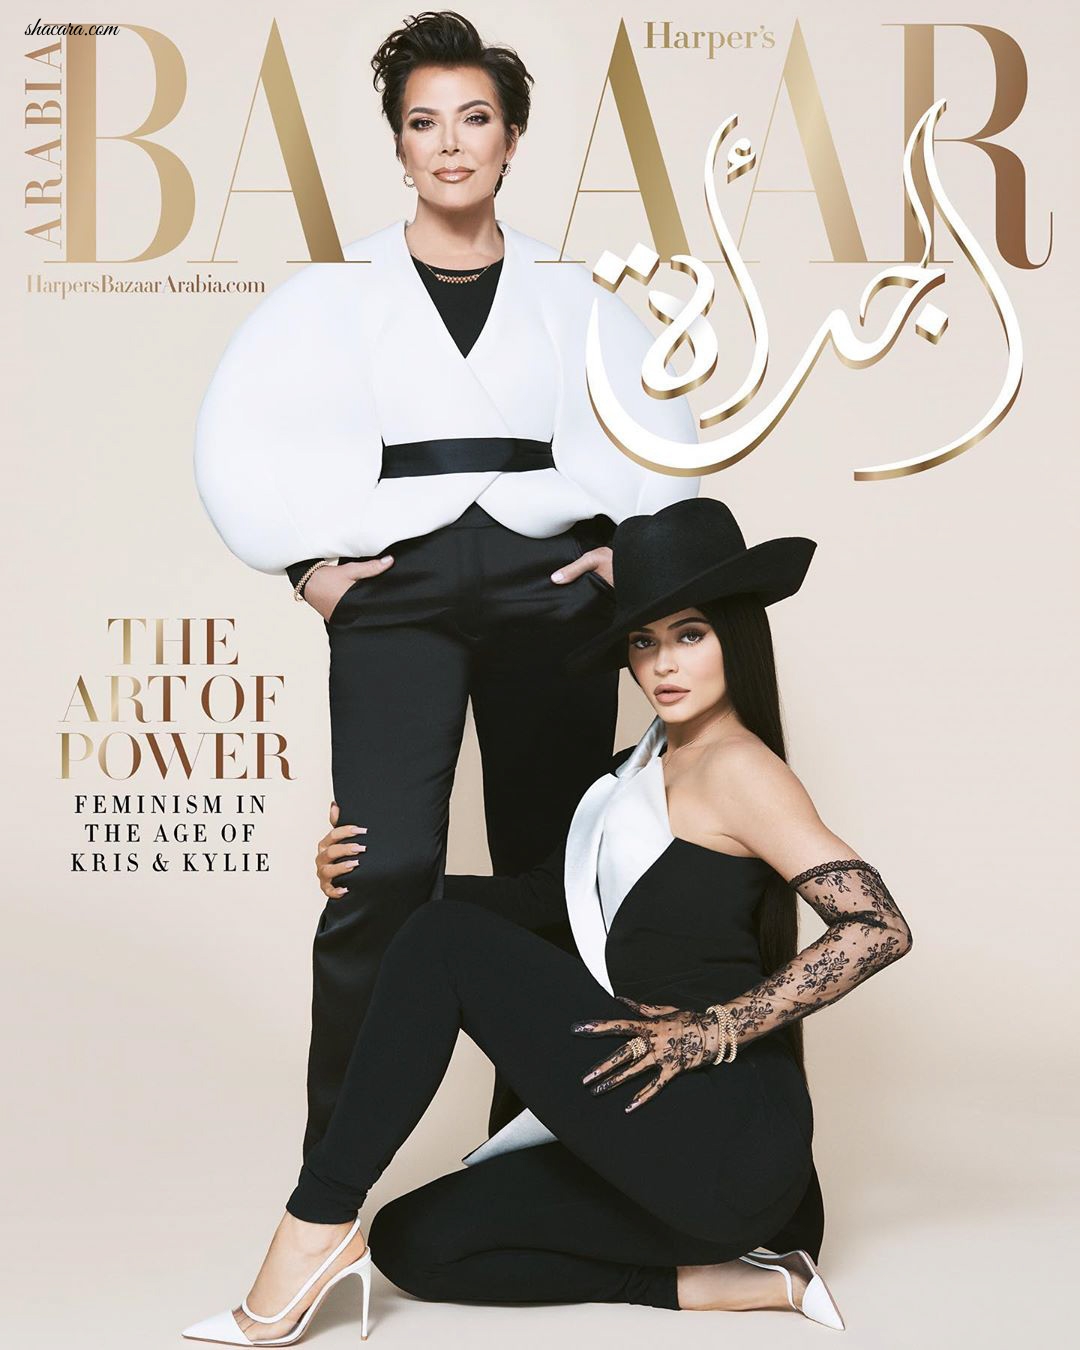 Hapers Bazaar Sits With Kris and Kylie Jenner, Discusses Family, Fame And Feminism